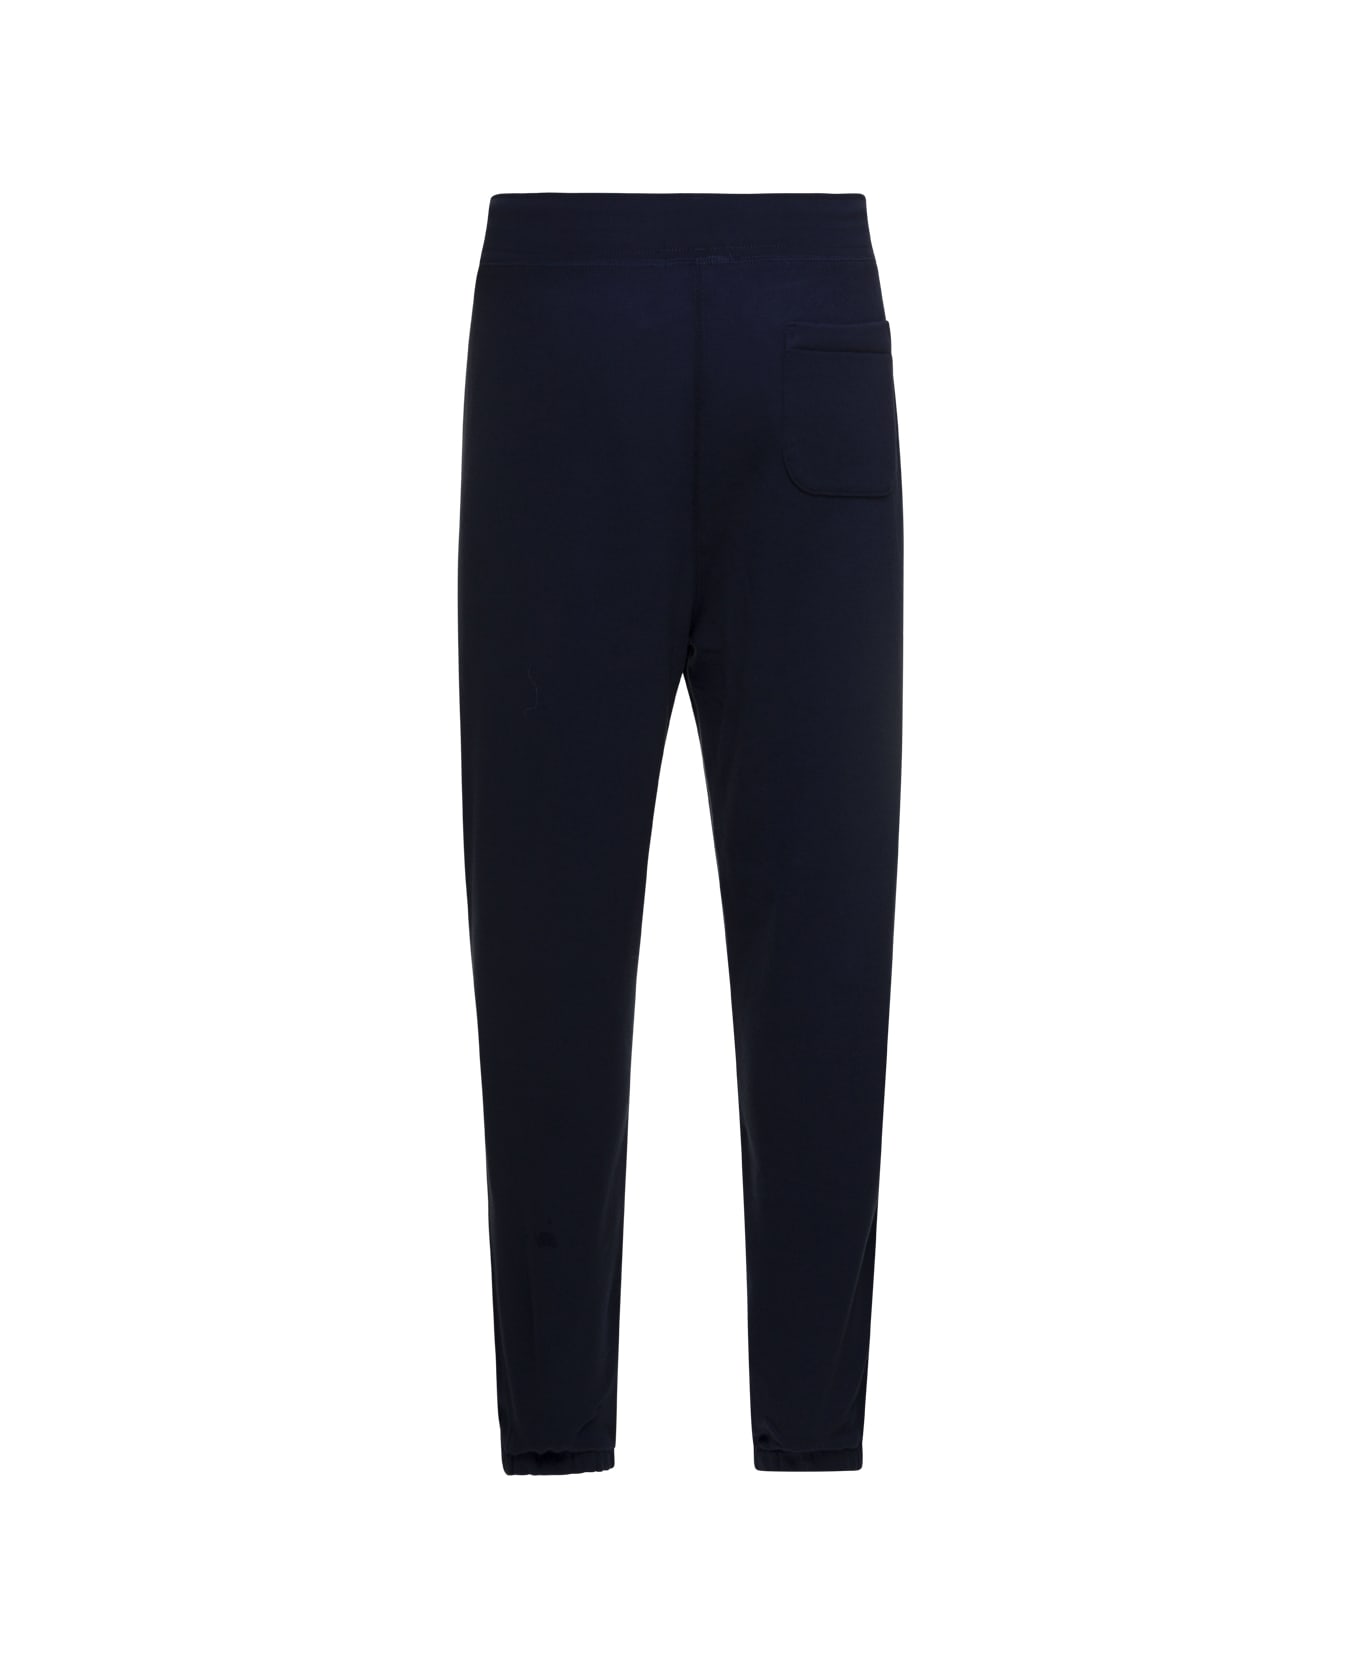 Polo Ralph Lauren Blue Sweatpants With Drawstring In Cotton Blend Man - Blue ボトムス